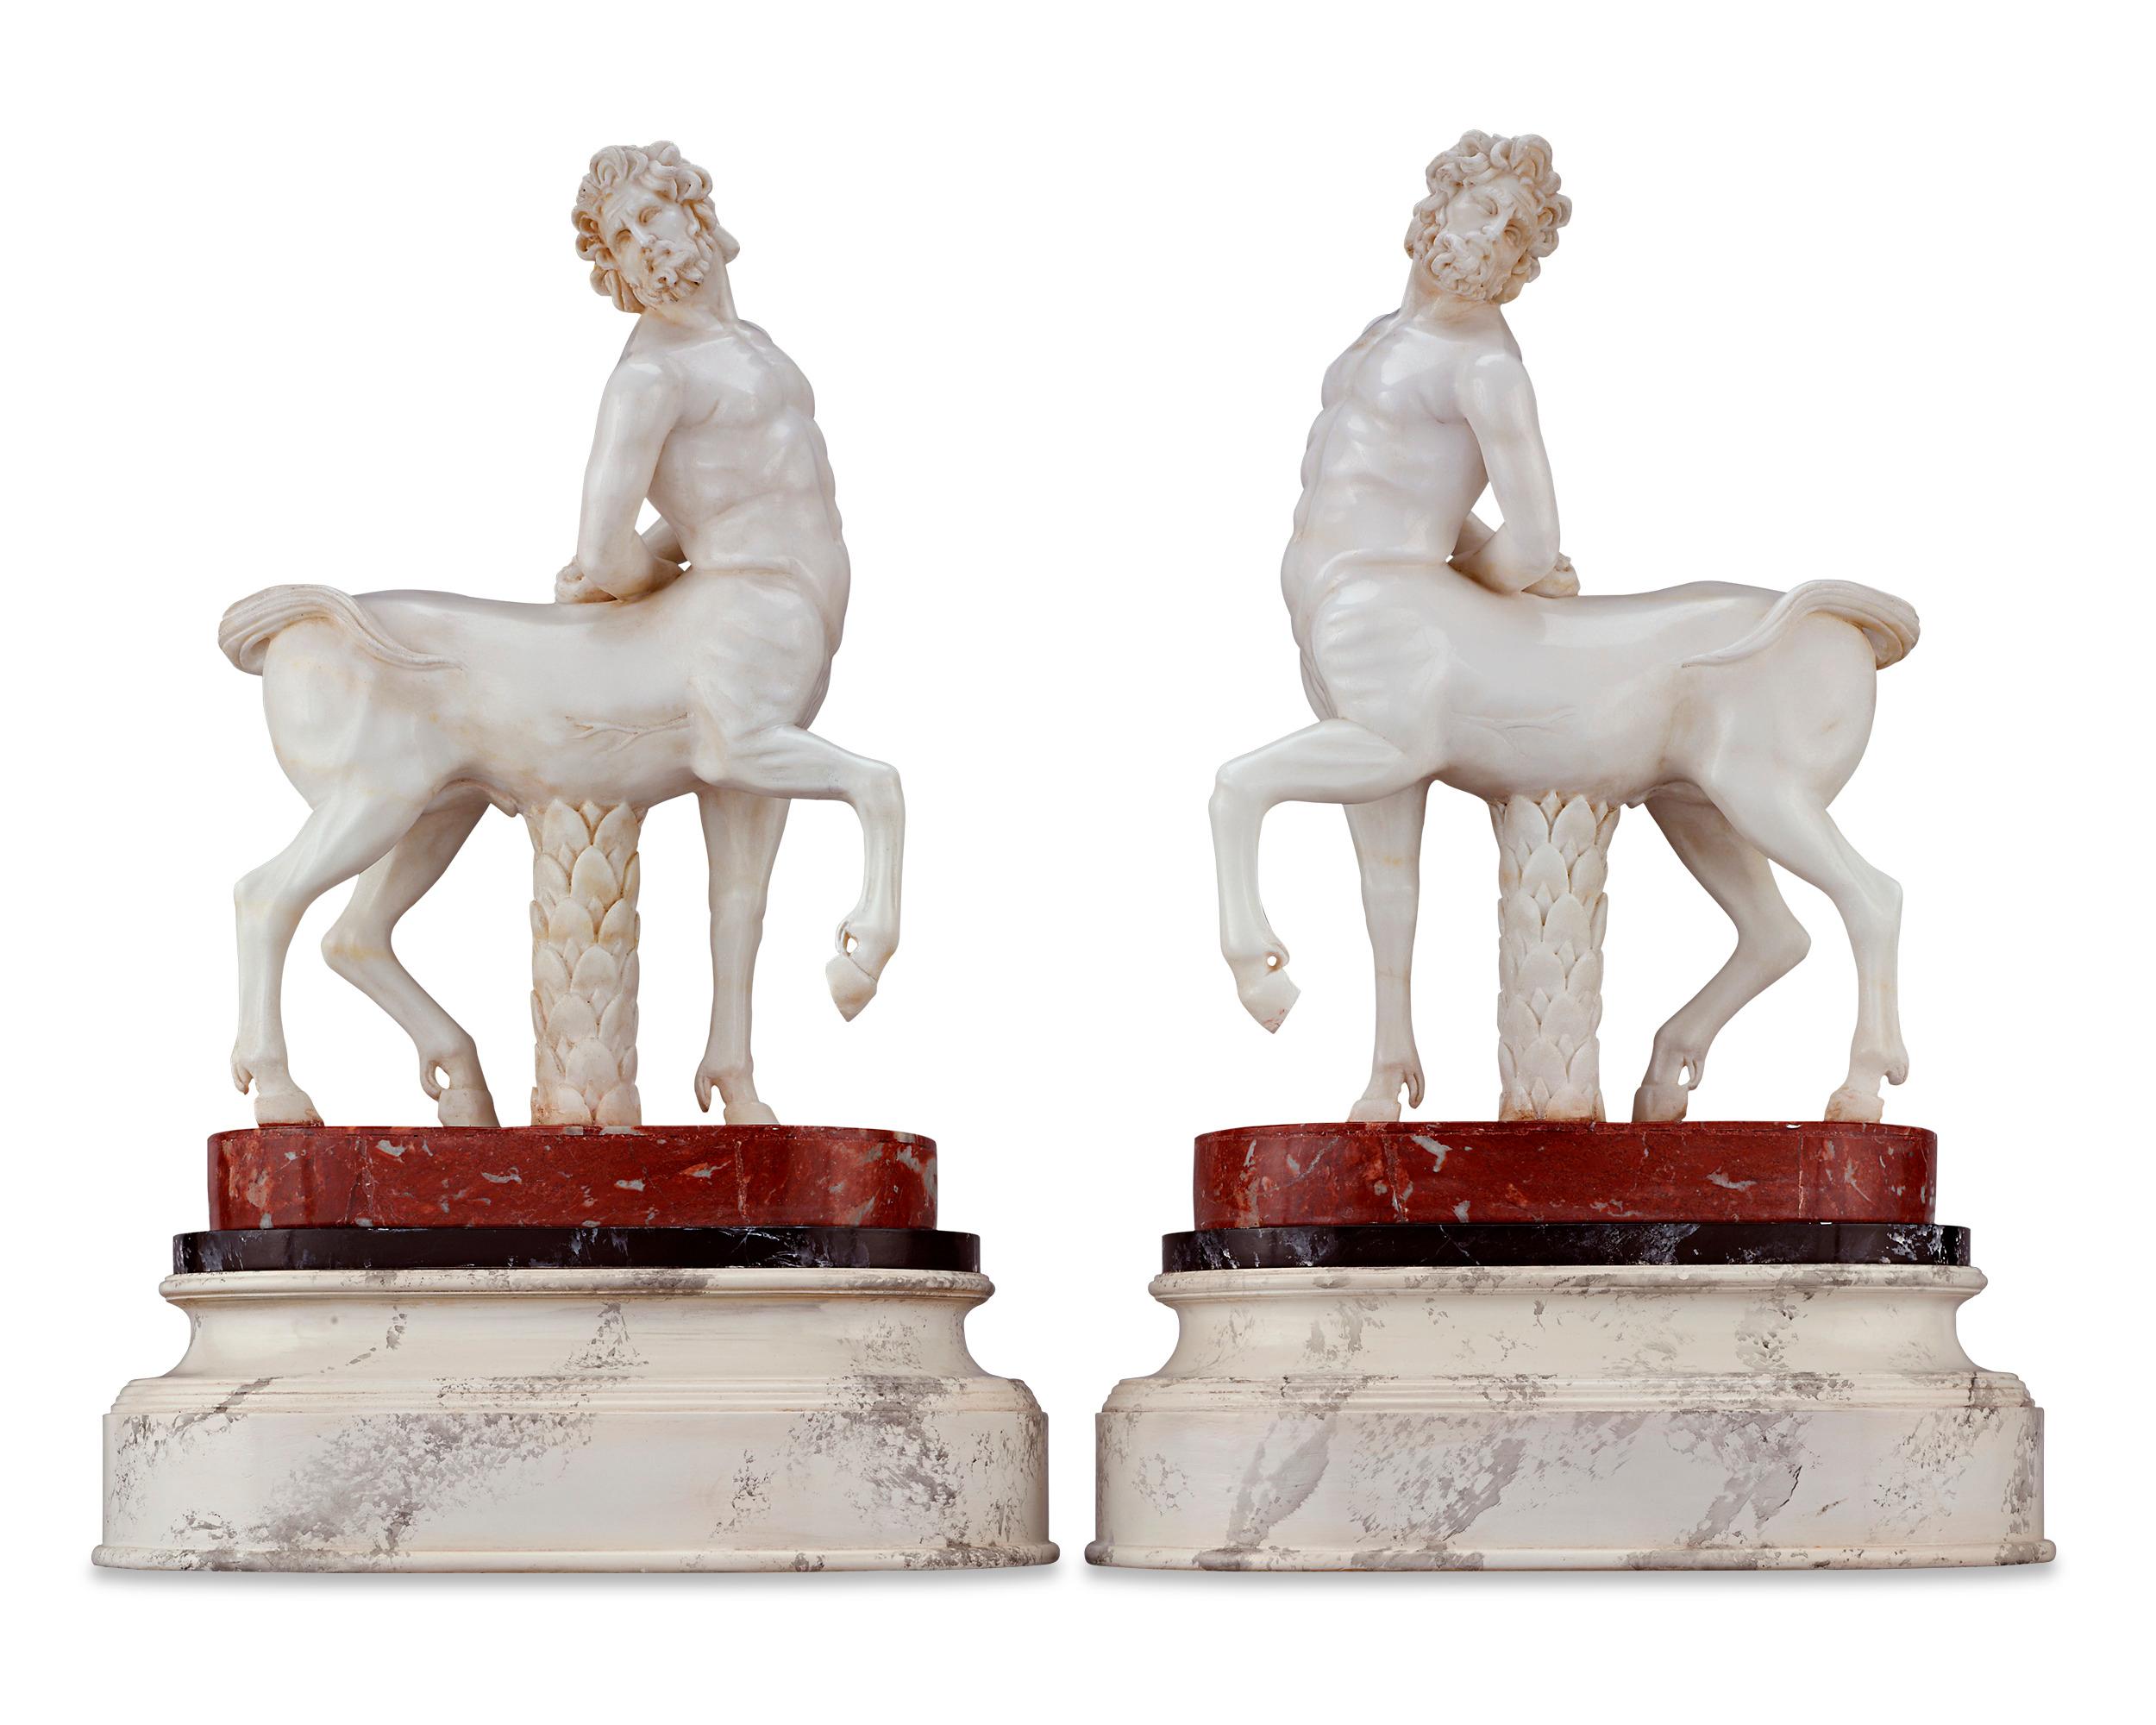 These remarkable Italian marble objets d'art are based on two of the most famous classical sculptures ever found, the Furietti Centaurs. These Roman marble centaurs were excavated together at Hadrian's Villa in December of 1736. The duo was named